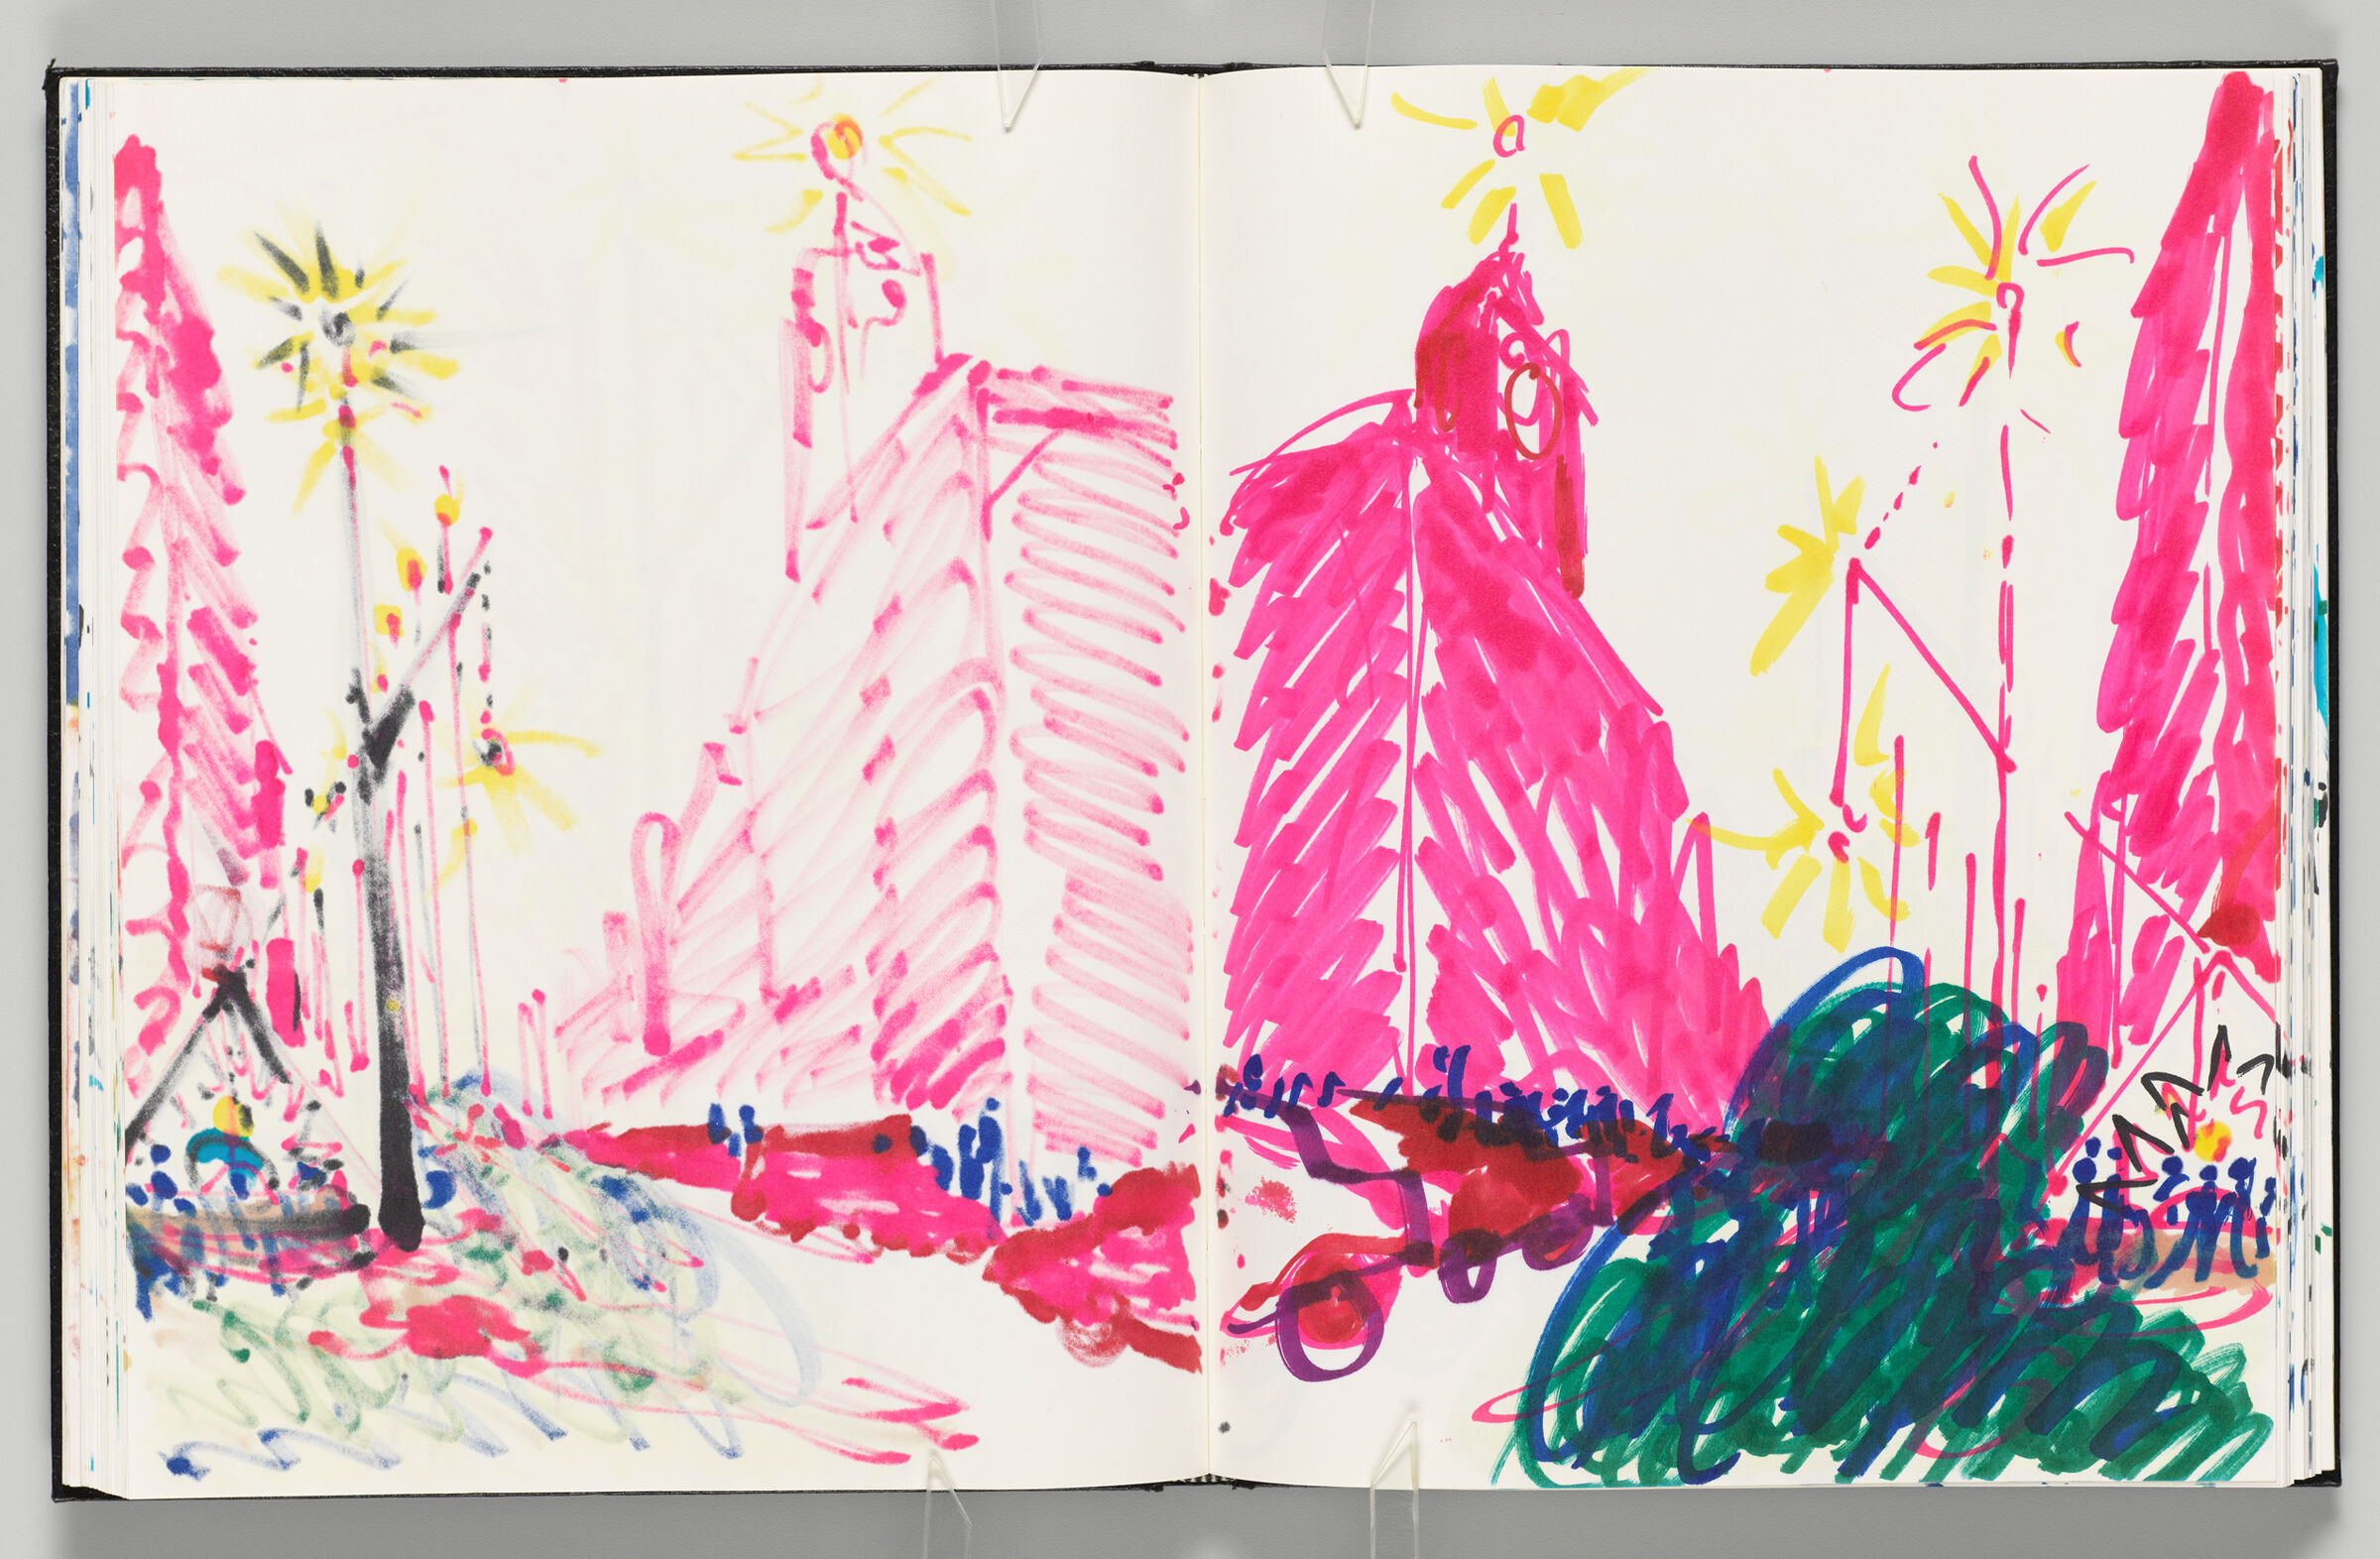 Untitled (Bleed-Through Of Previous Page, Left Page); Untitled (Sculpture Design Set In Kendall Square, Right Page)